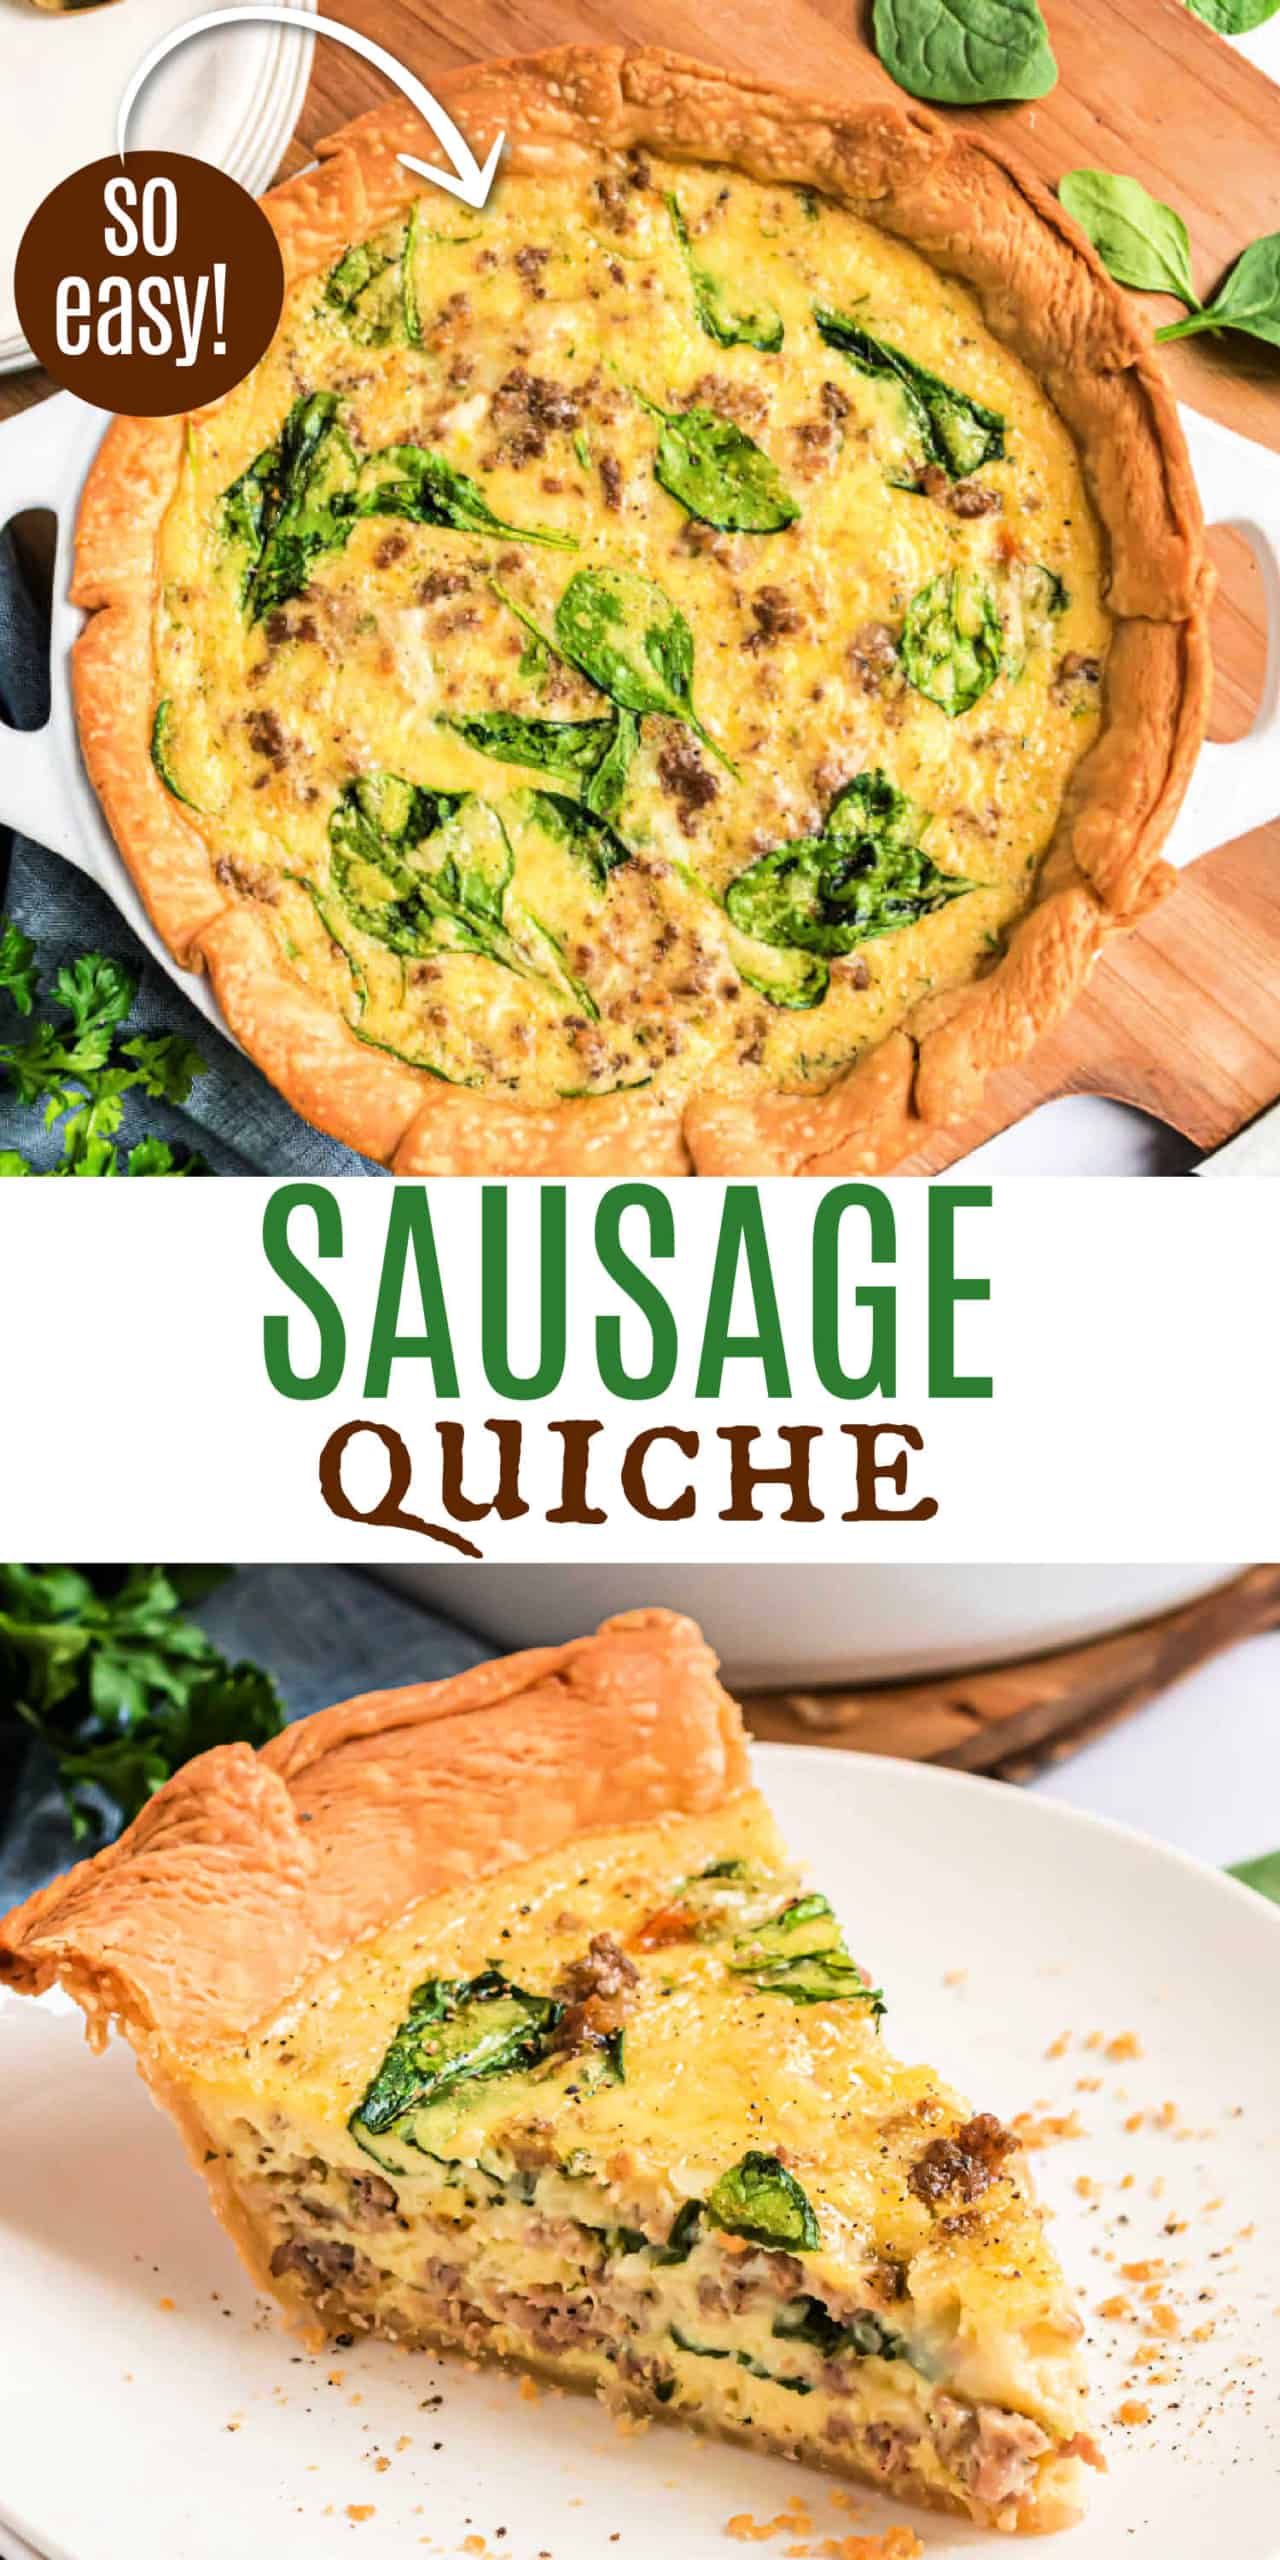 Spinach and Sausage Quiche - Shugary Sweets